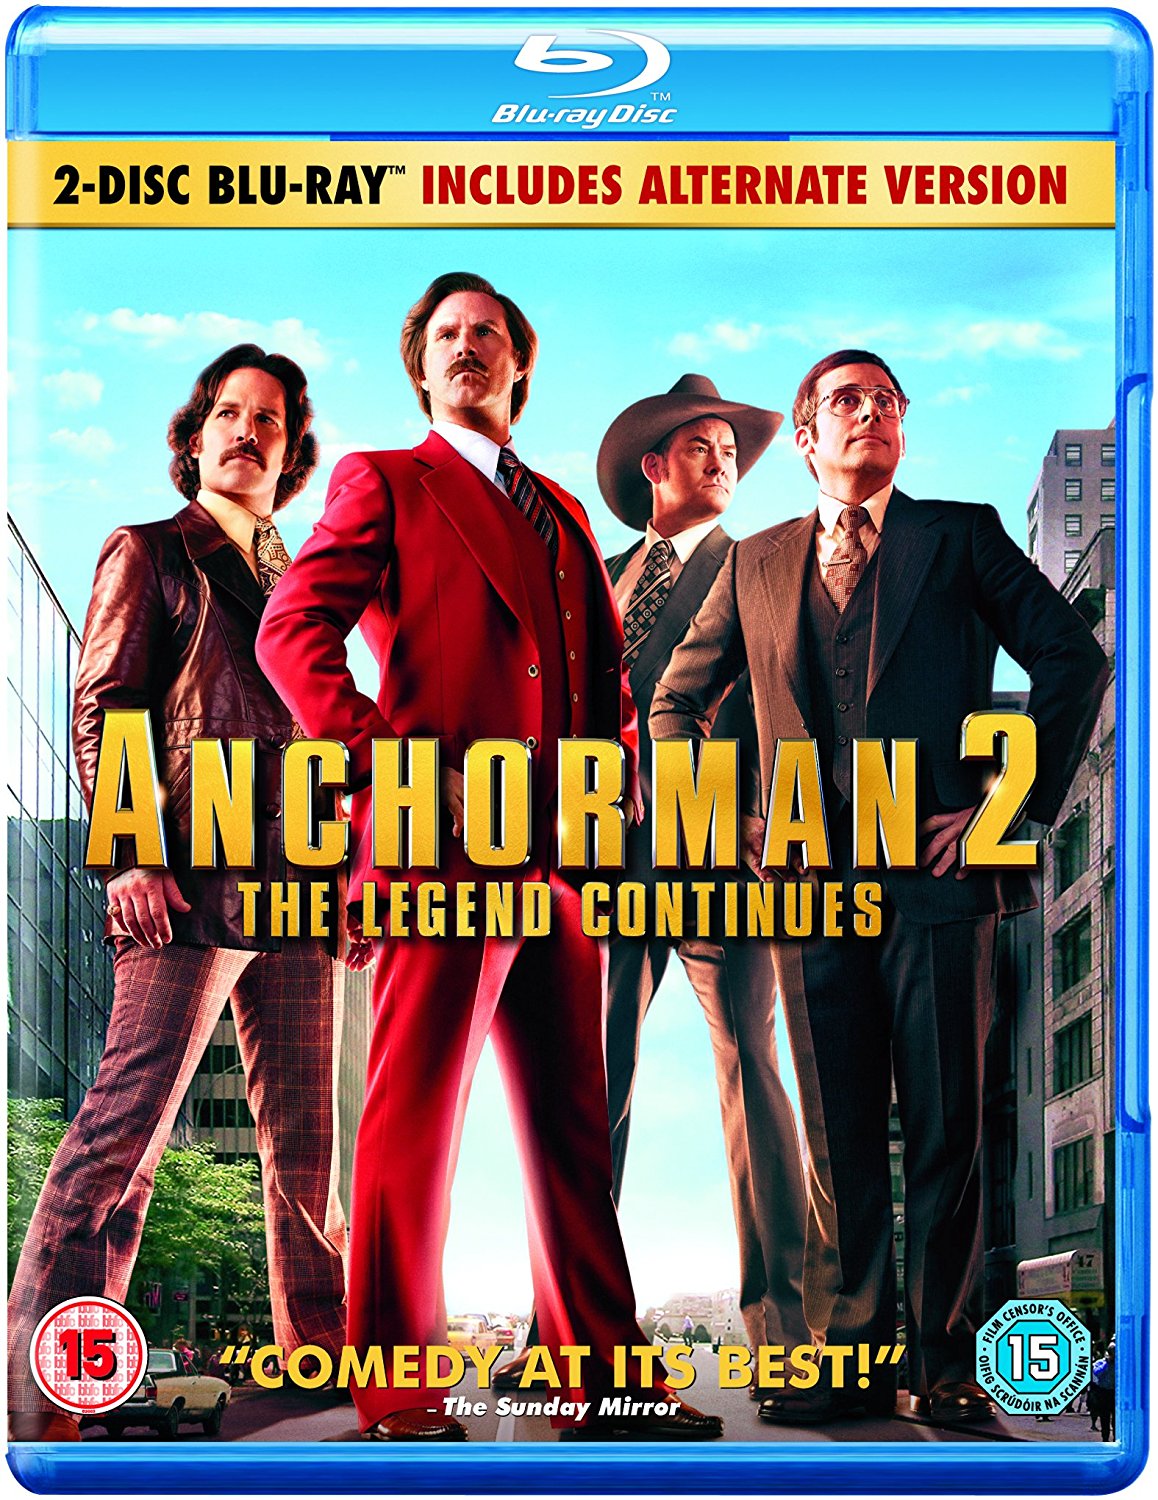 Anchorman 2: The Legend Continues - Theatrical & Alternate Versions (Blu-ray)